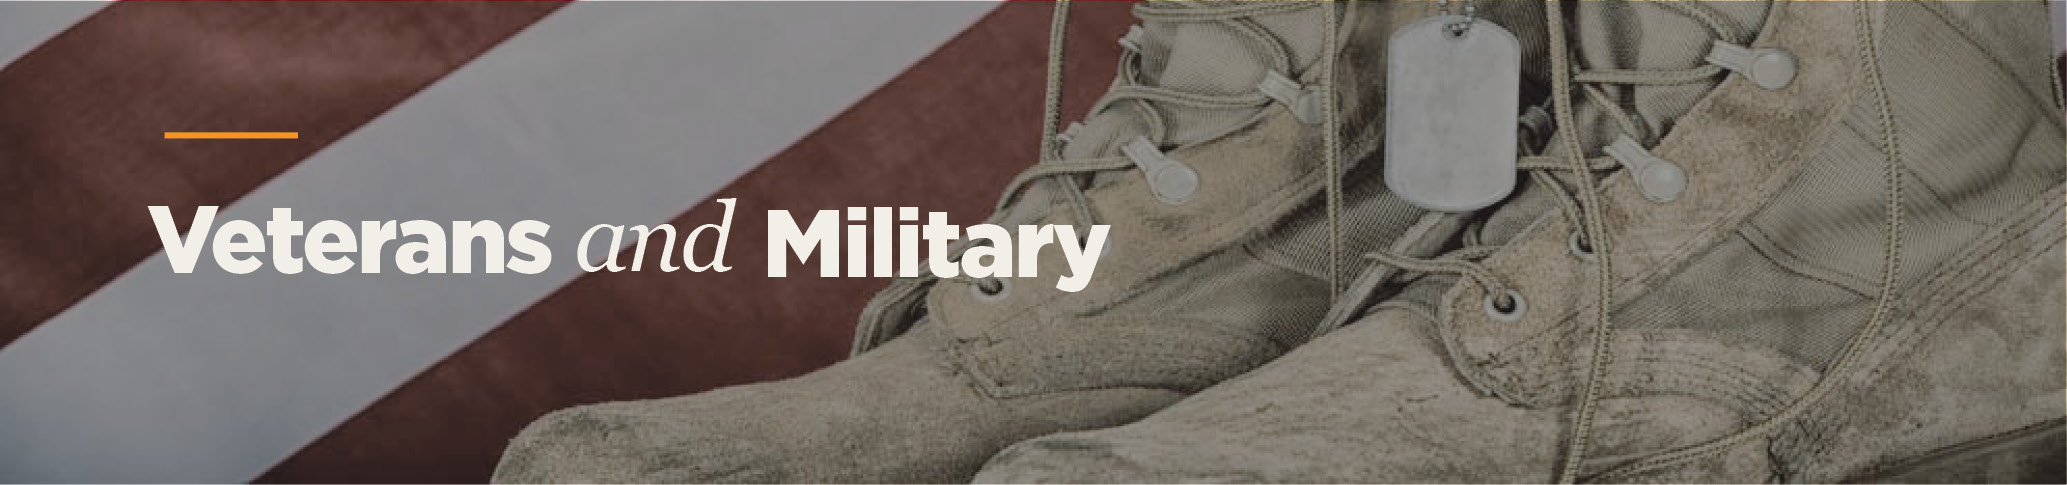 army boots, dog tags in front of American flag